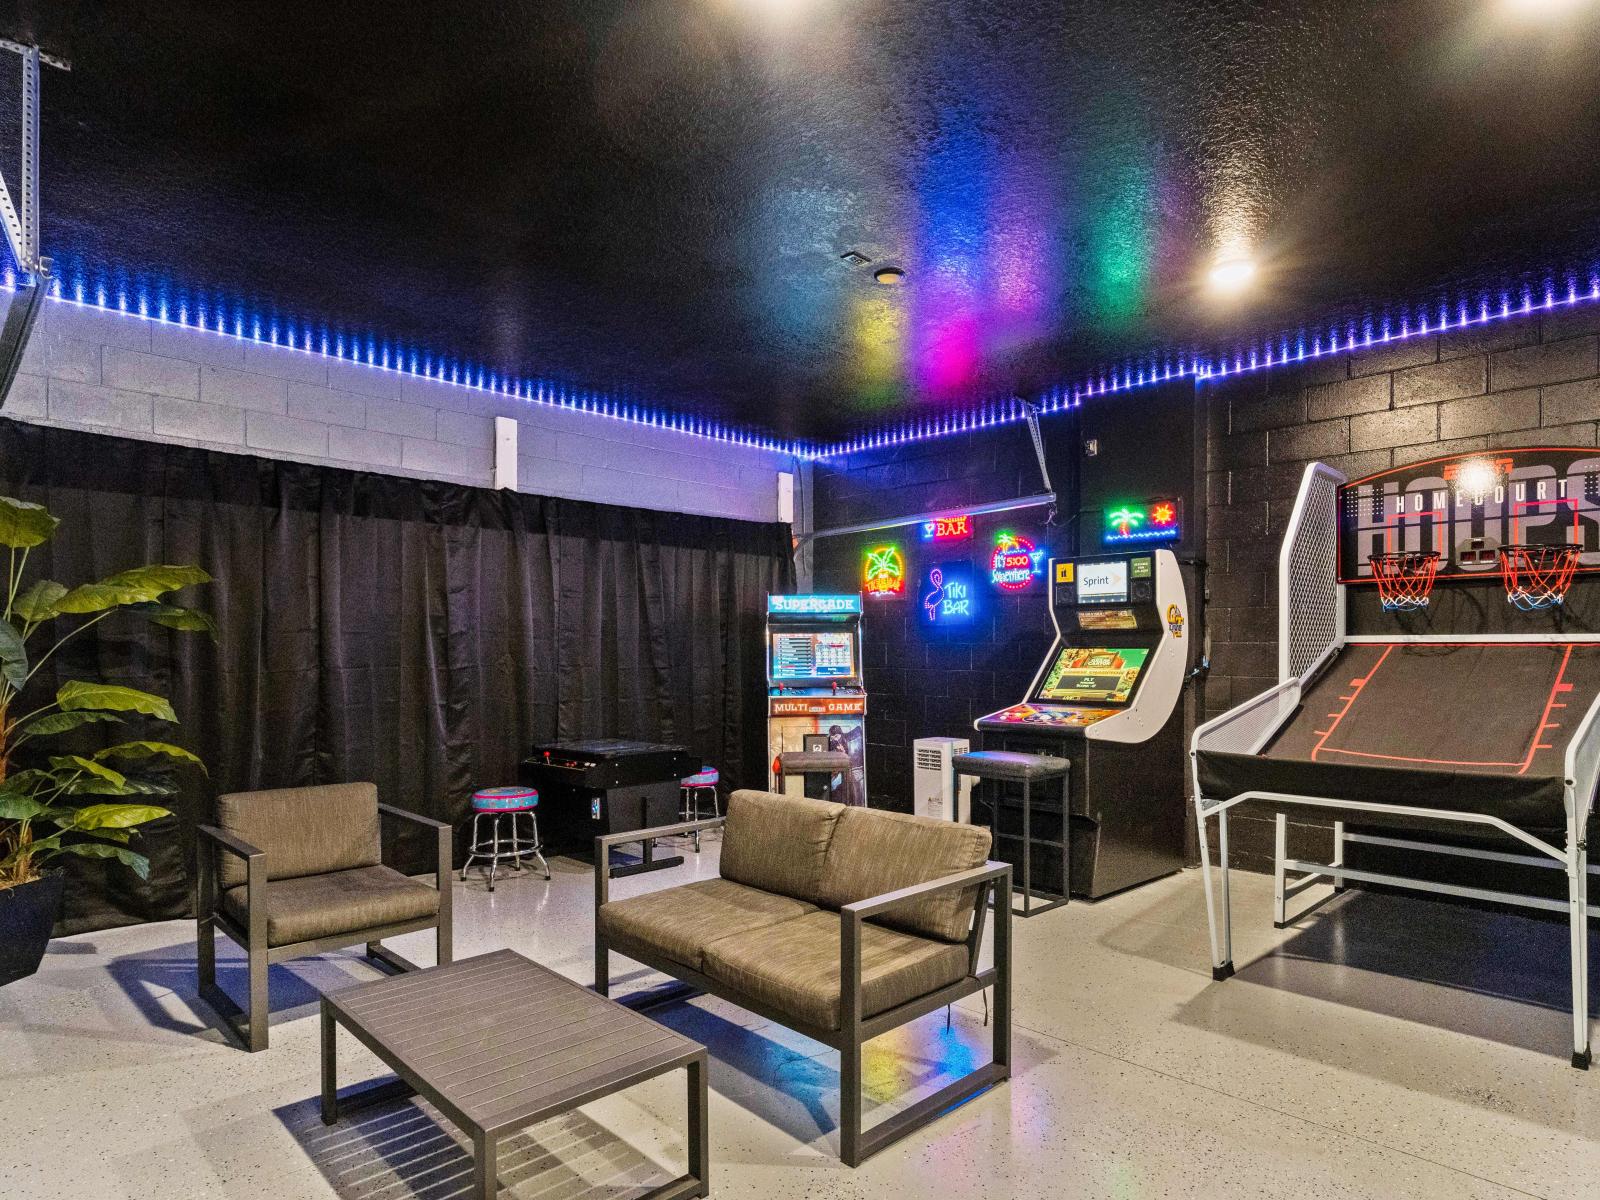 Game room with arcade games